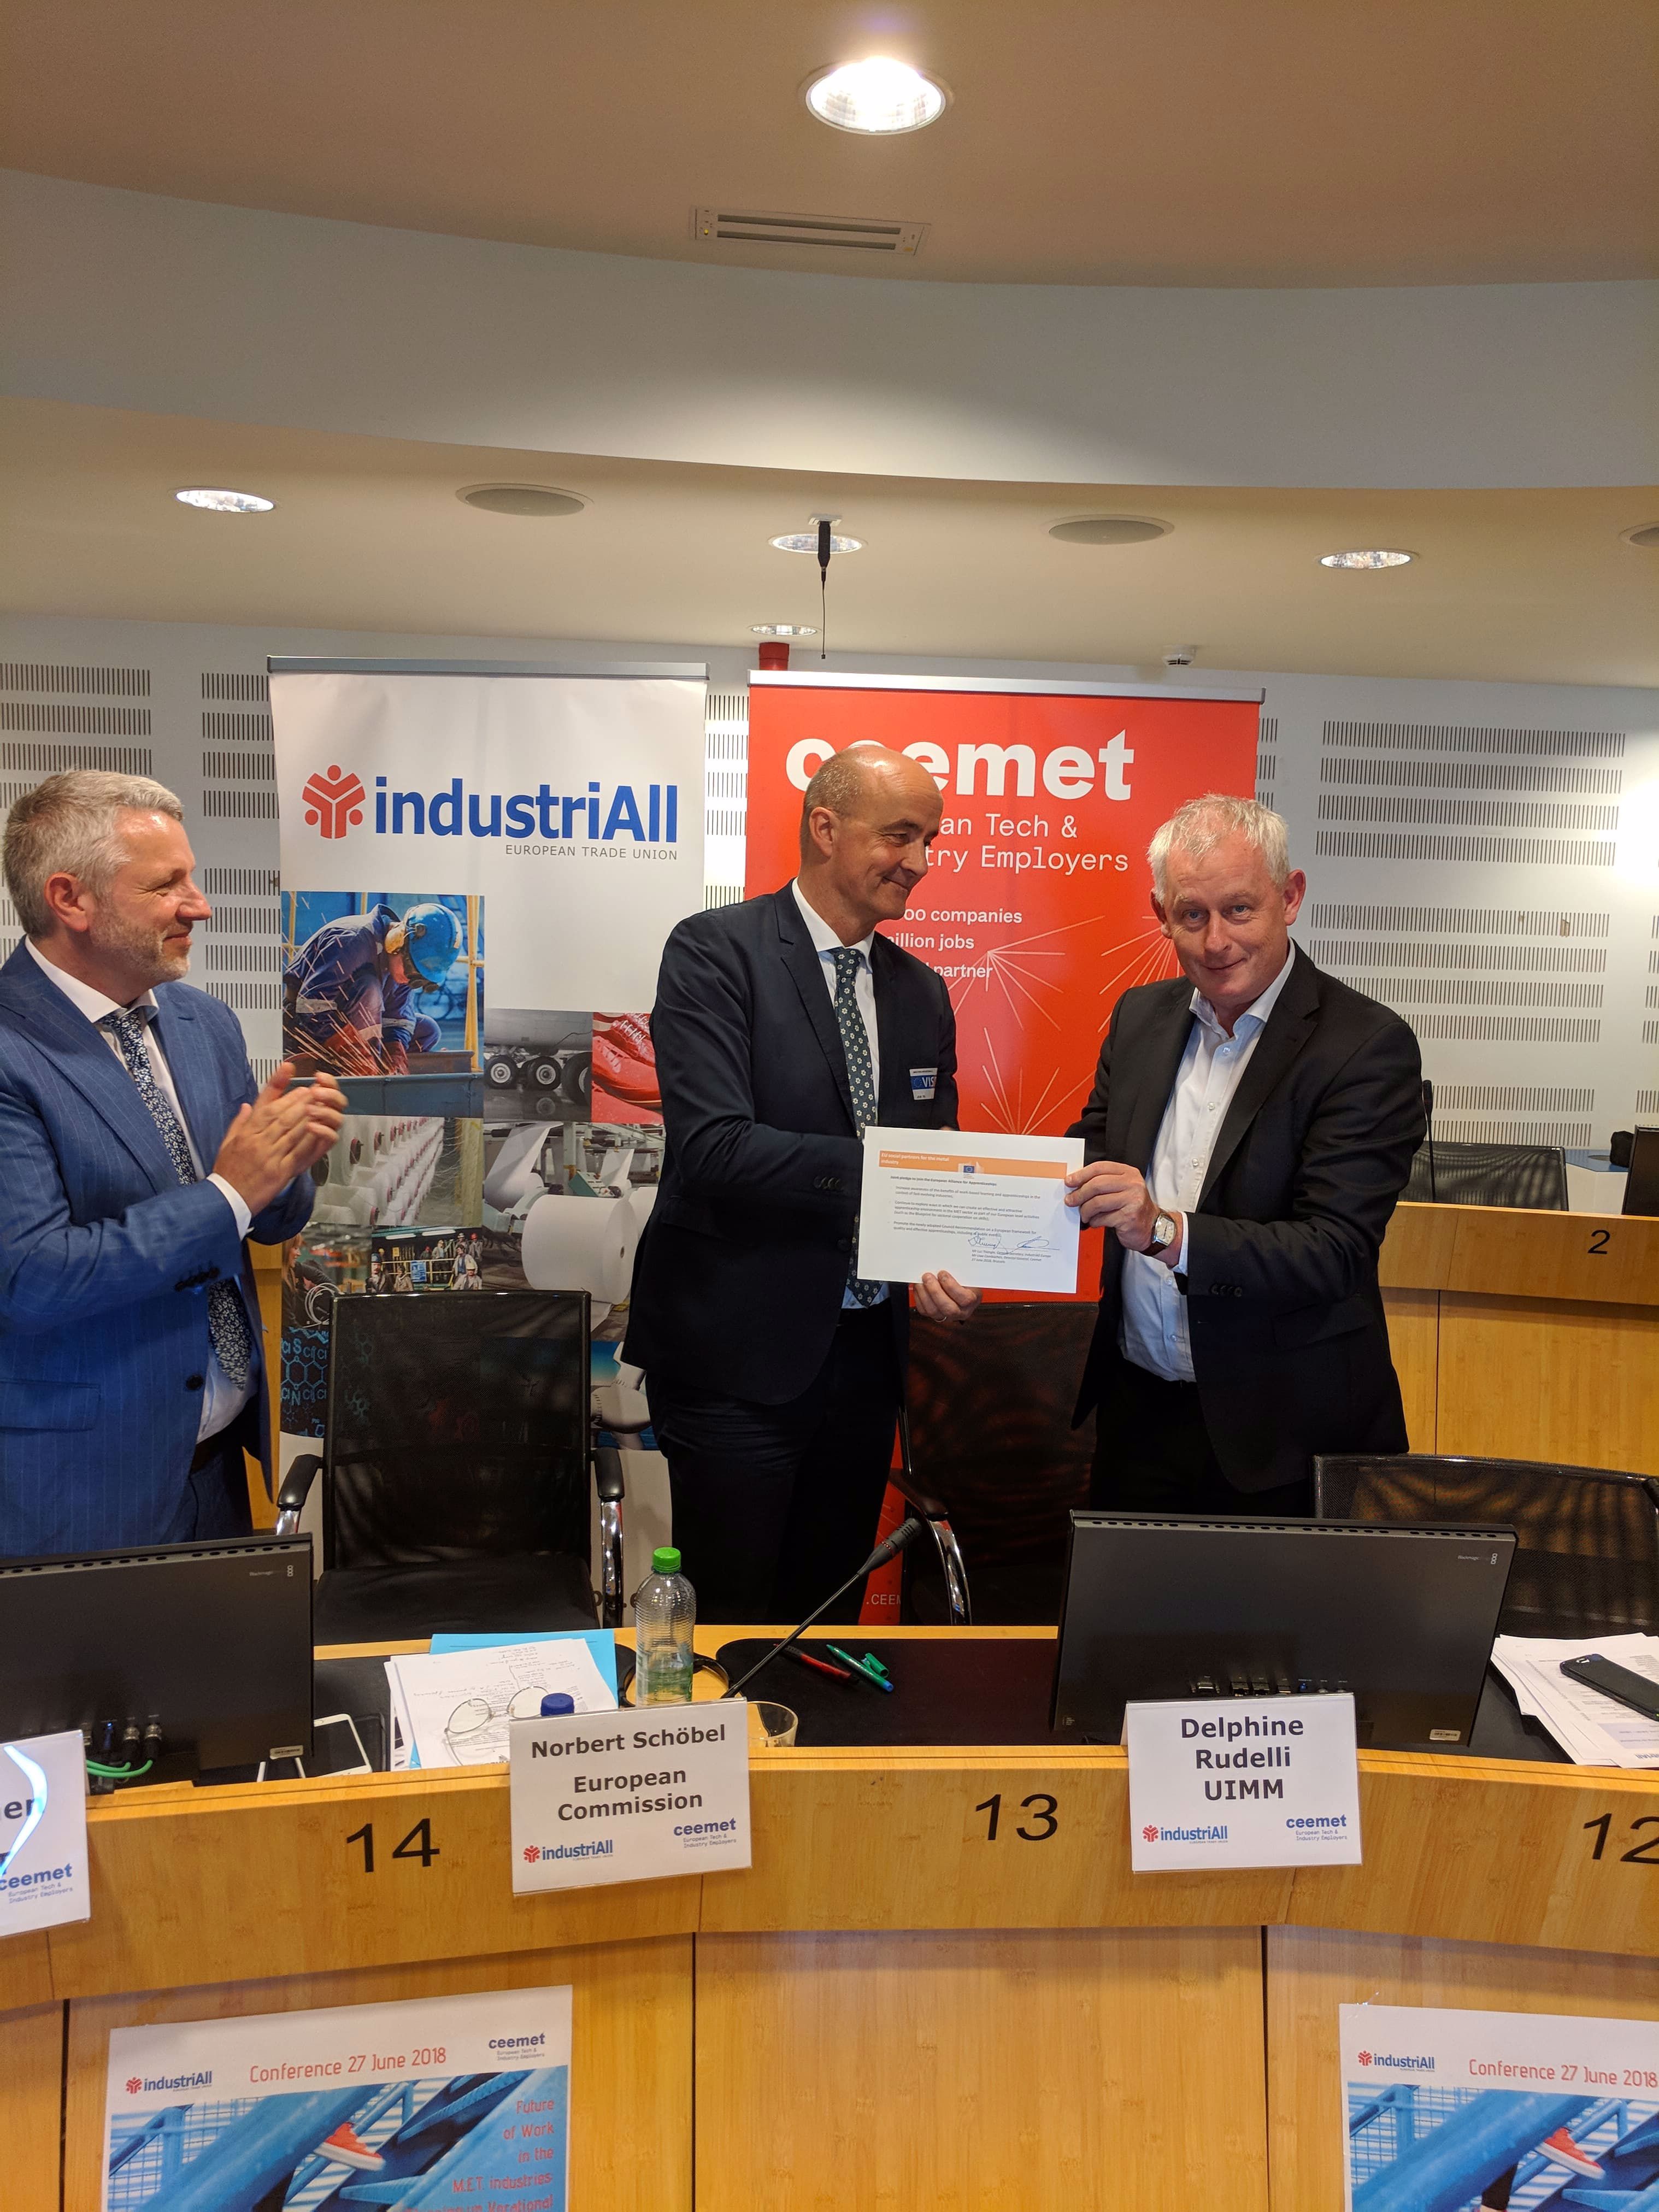 JOINT PRESS RELEASE: IndustriAll Europe & Ceemet join the European Alliance for Apprenticeships and pledge to promote high-quality & effective Vocational Education & Training